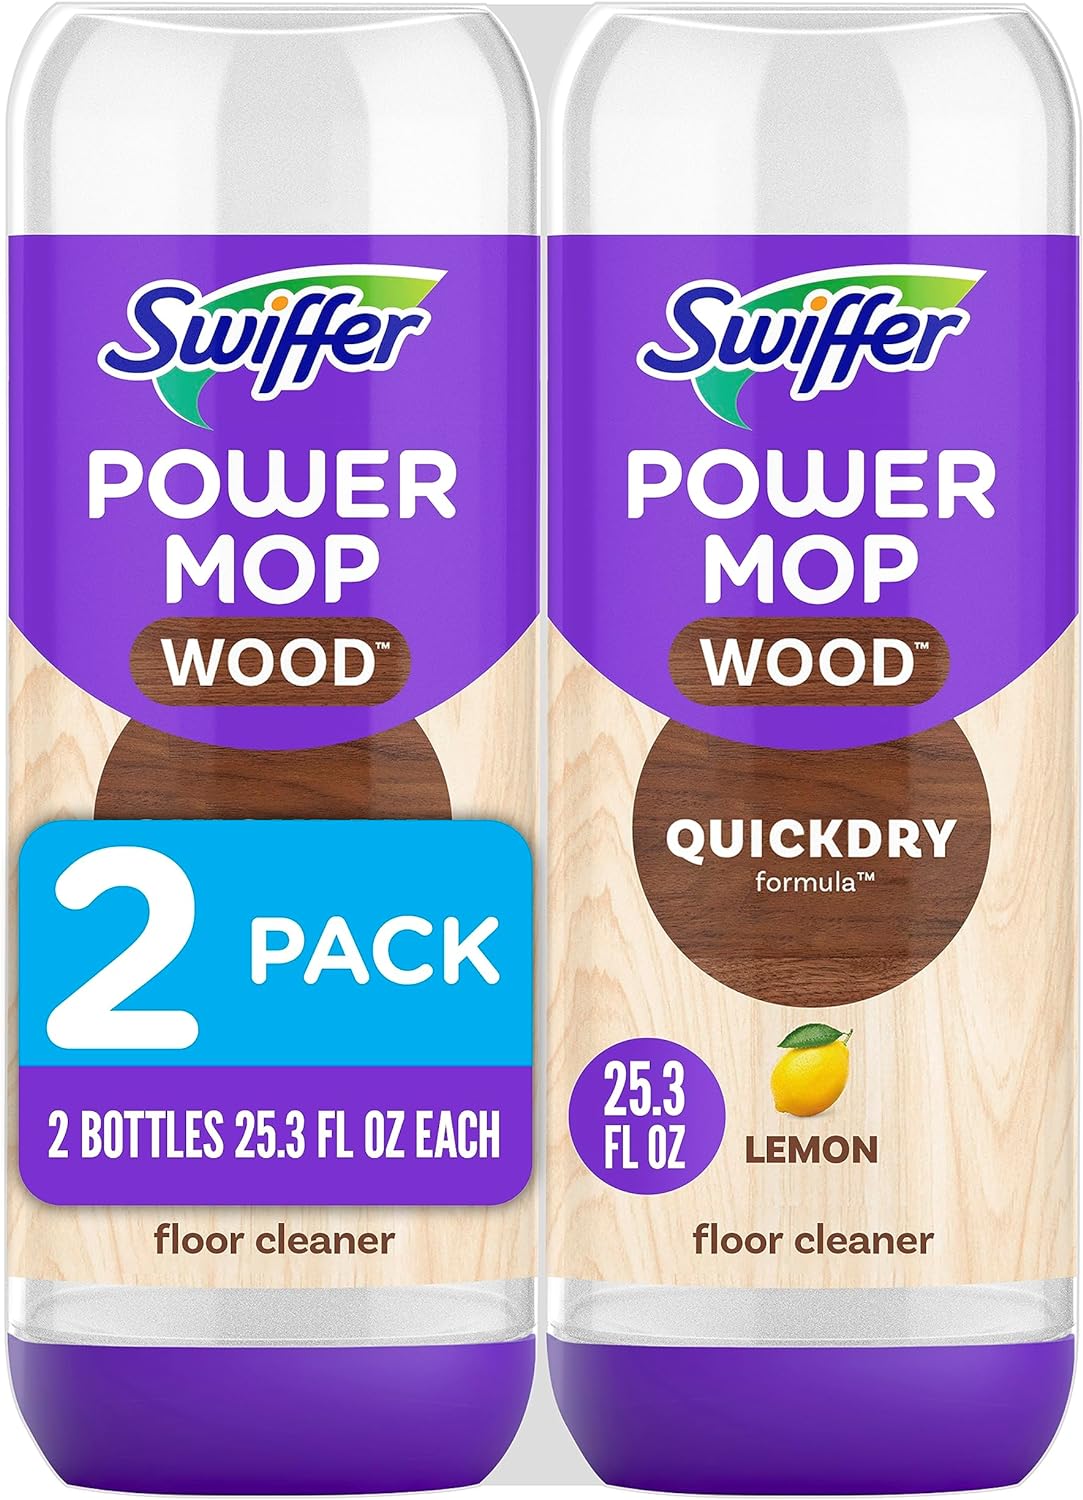 Swiffer PowerMop Wood QuickDry Wood Floor Cleaning Solution with Lemon Scent, 25.3 fl oz, 2 pack